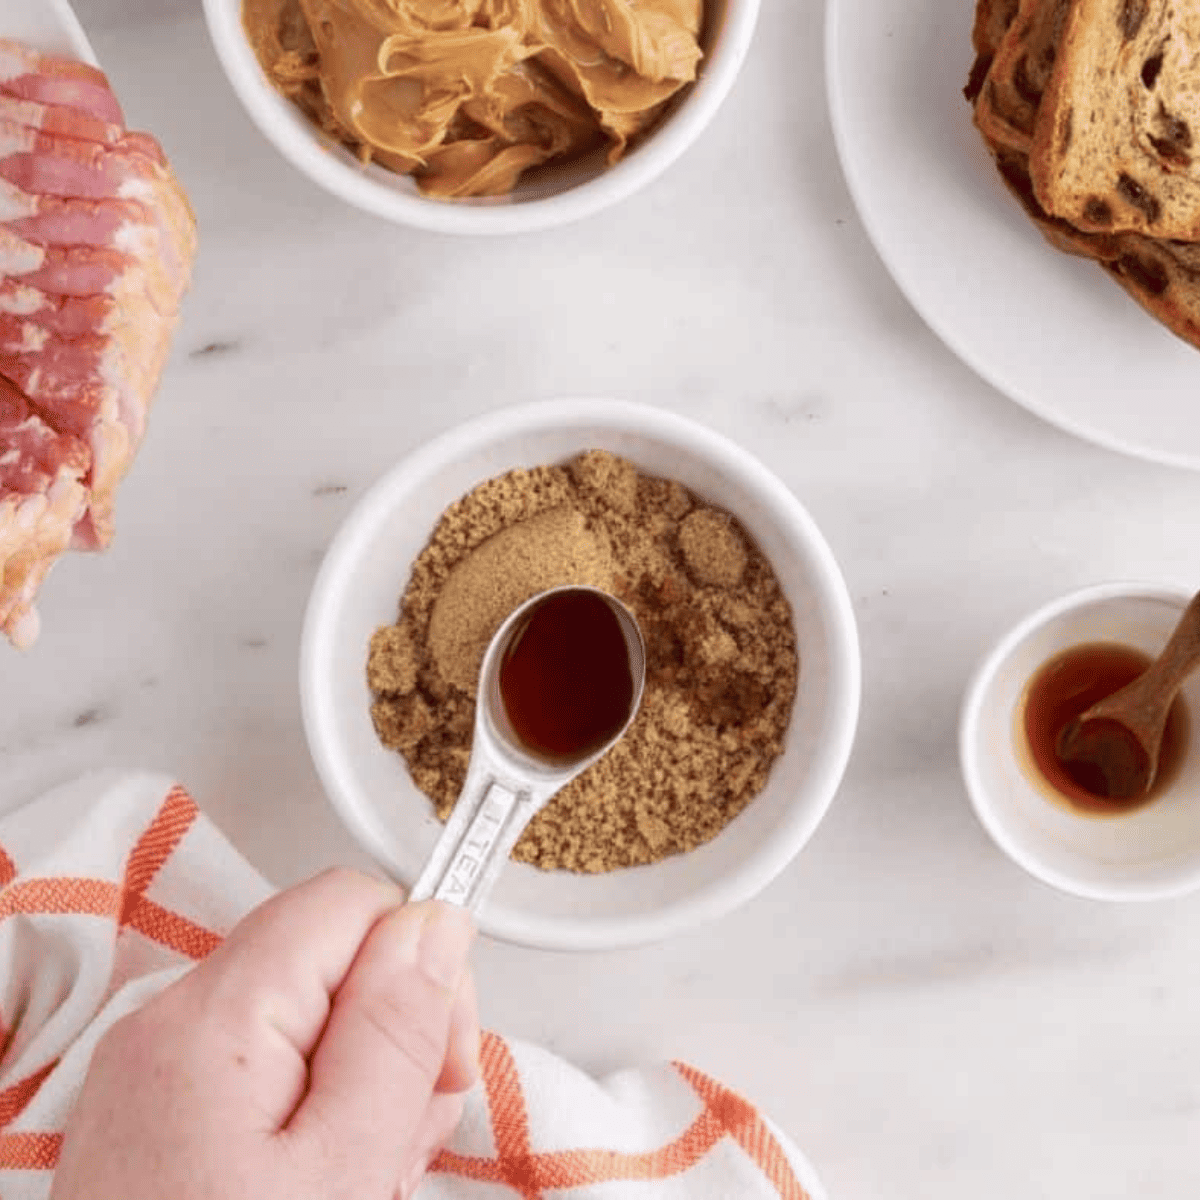 How To Make Air Fryer Peanut Butter and Bacon Sandwich